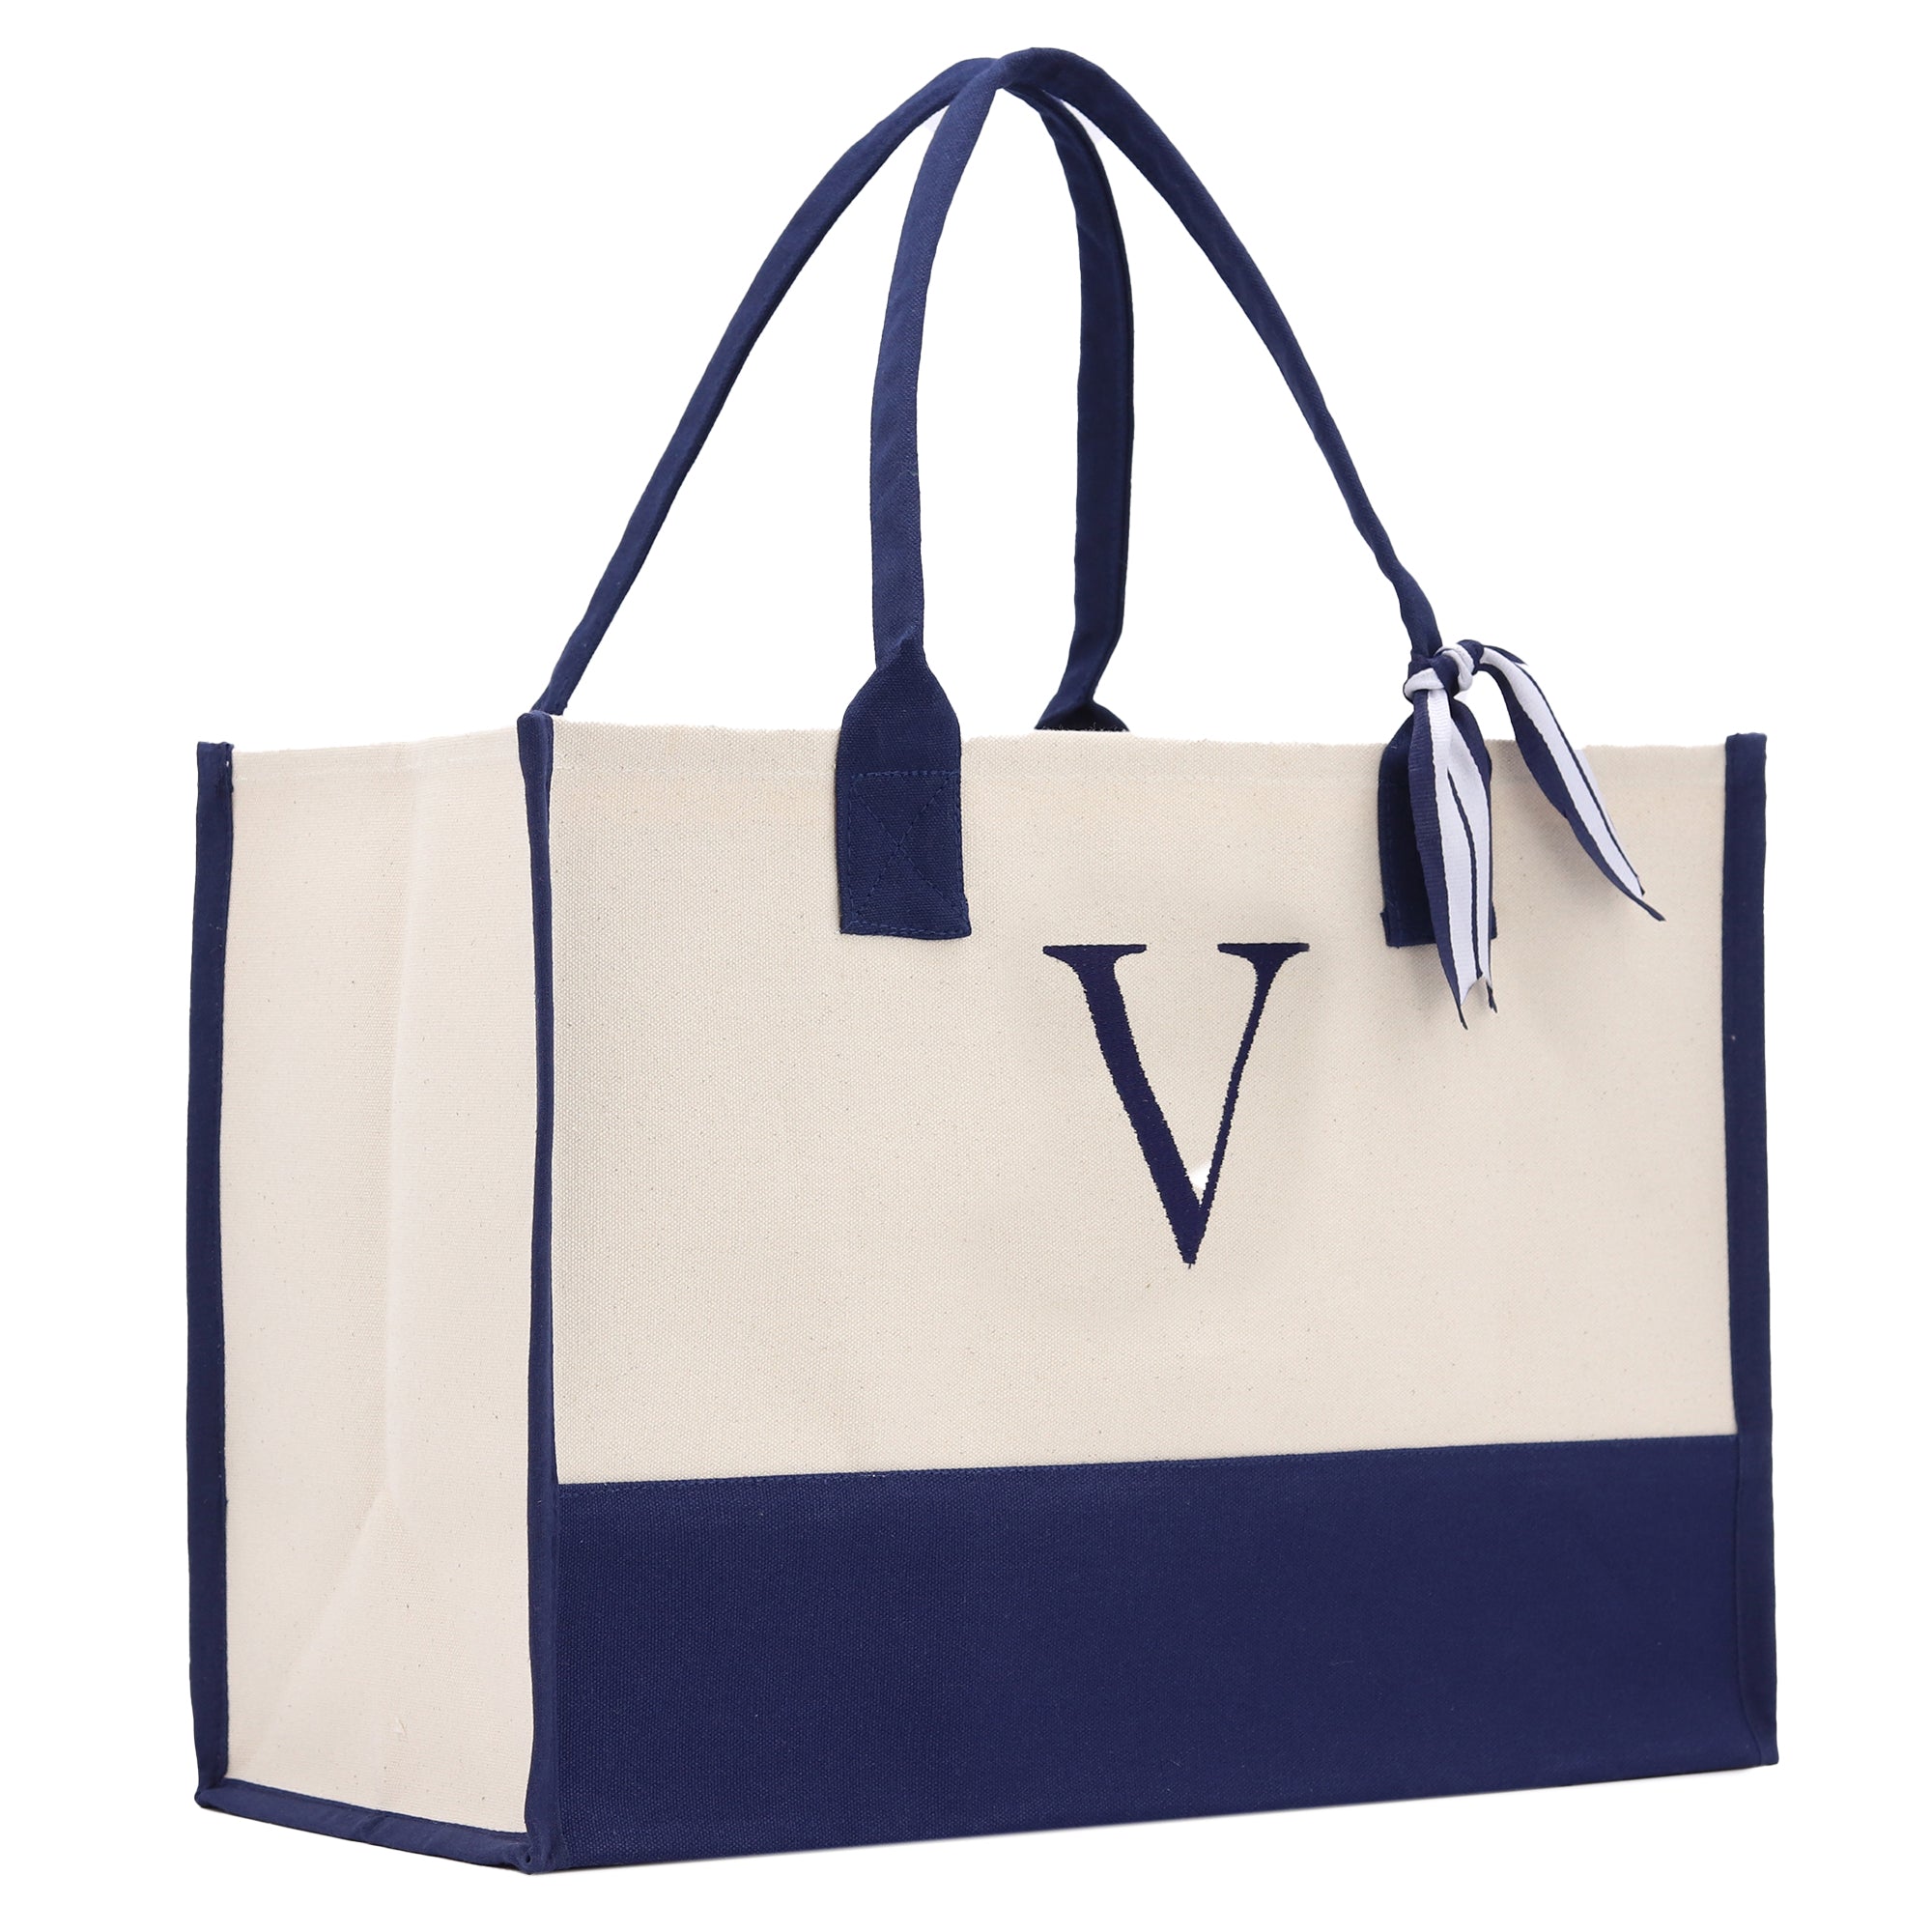 Monogram Tote Bag with 100% Cotton Canvas and a Chic Personalized Monogram Navy Blue Vanessa Rosella Block V 